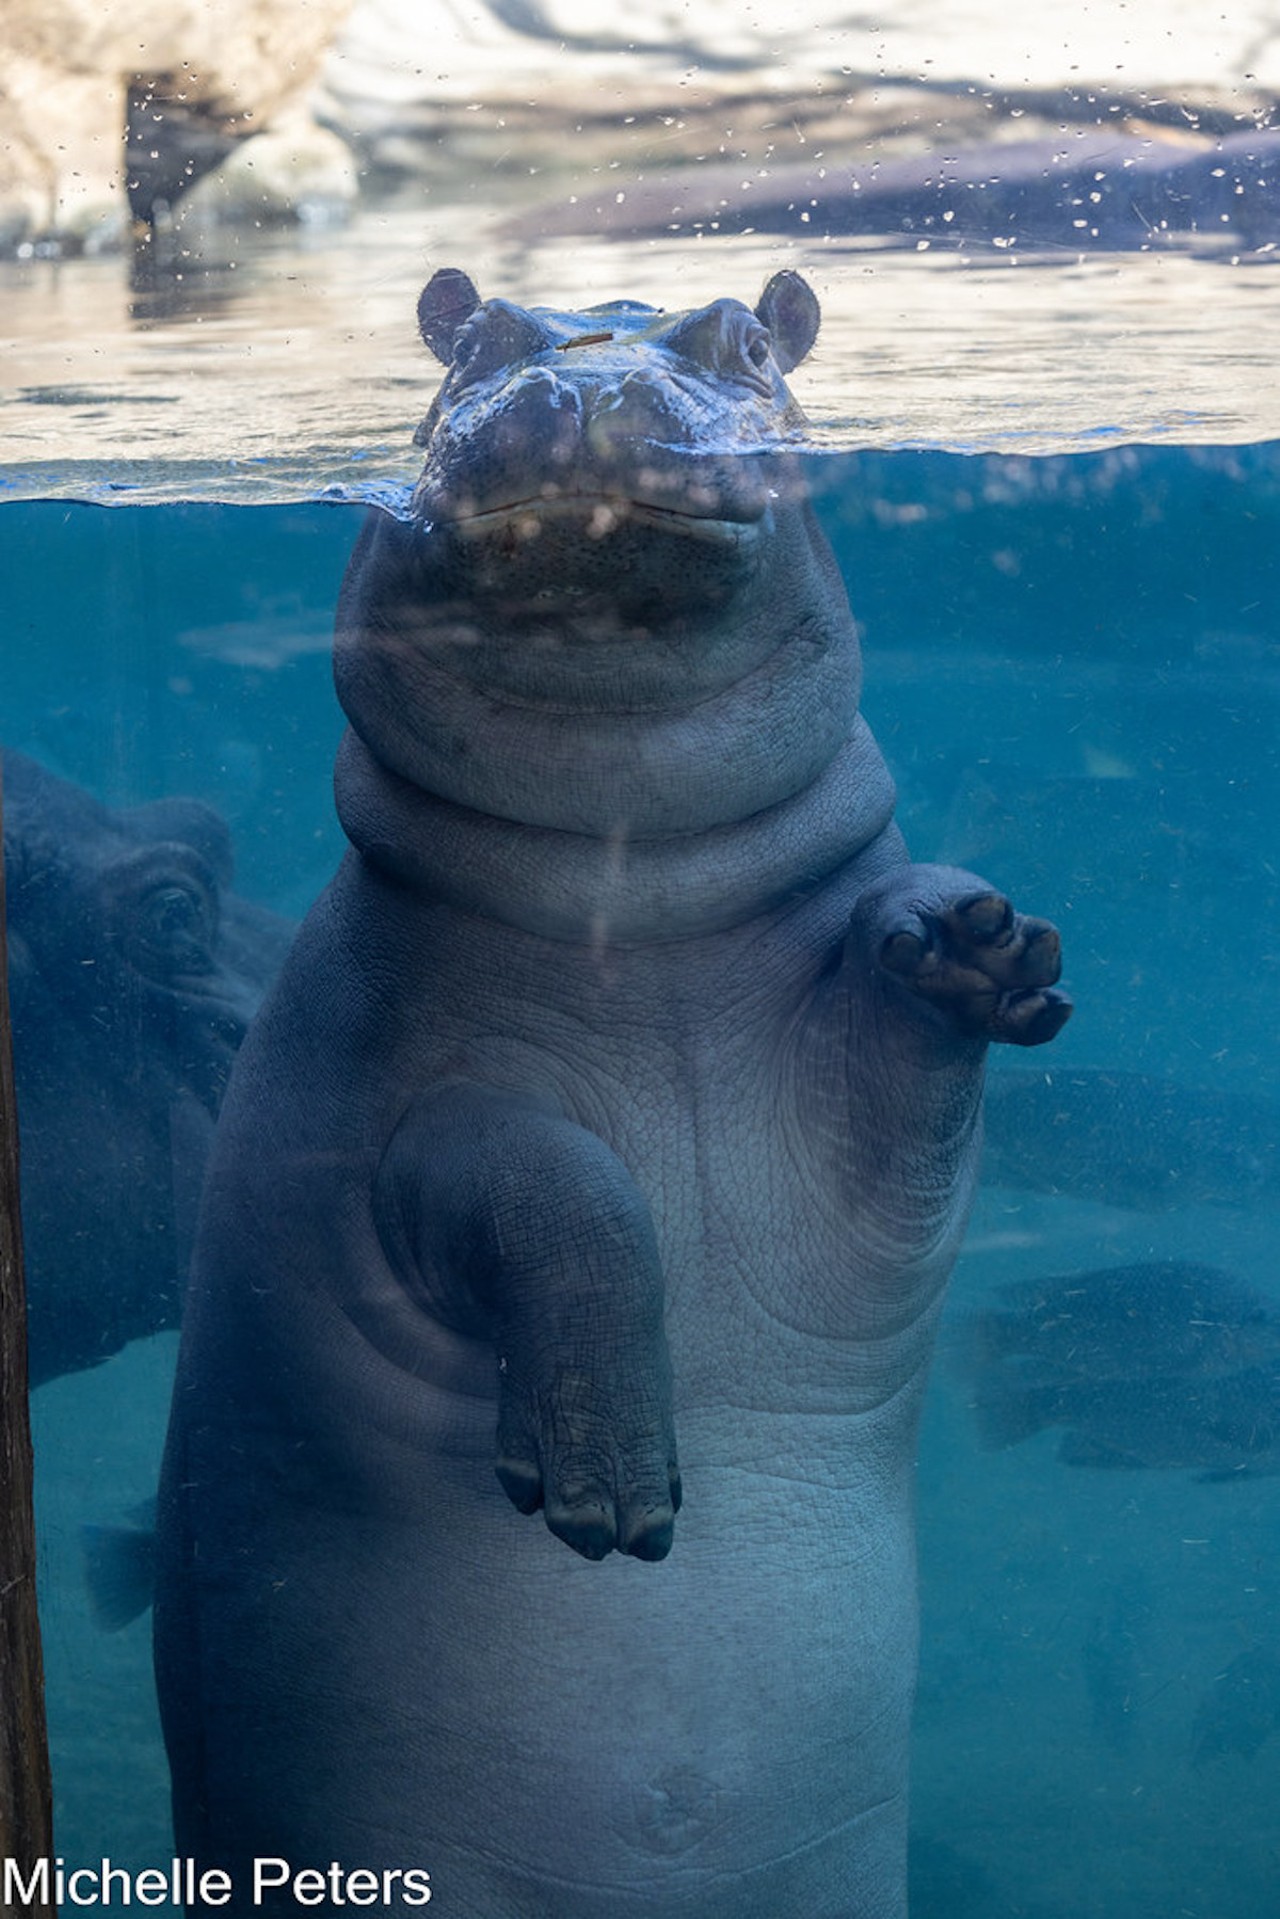 Fritz the hippo, born Aug. 3, 2022 to Bibi and Tucker; brother to the famous Fiona.